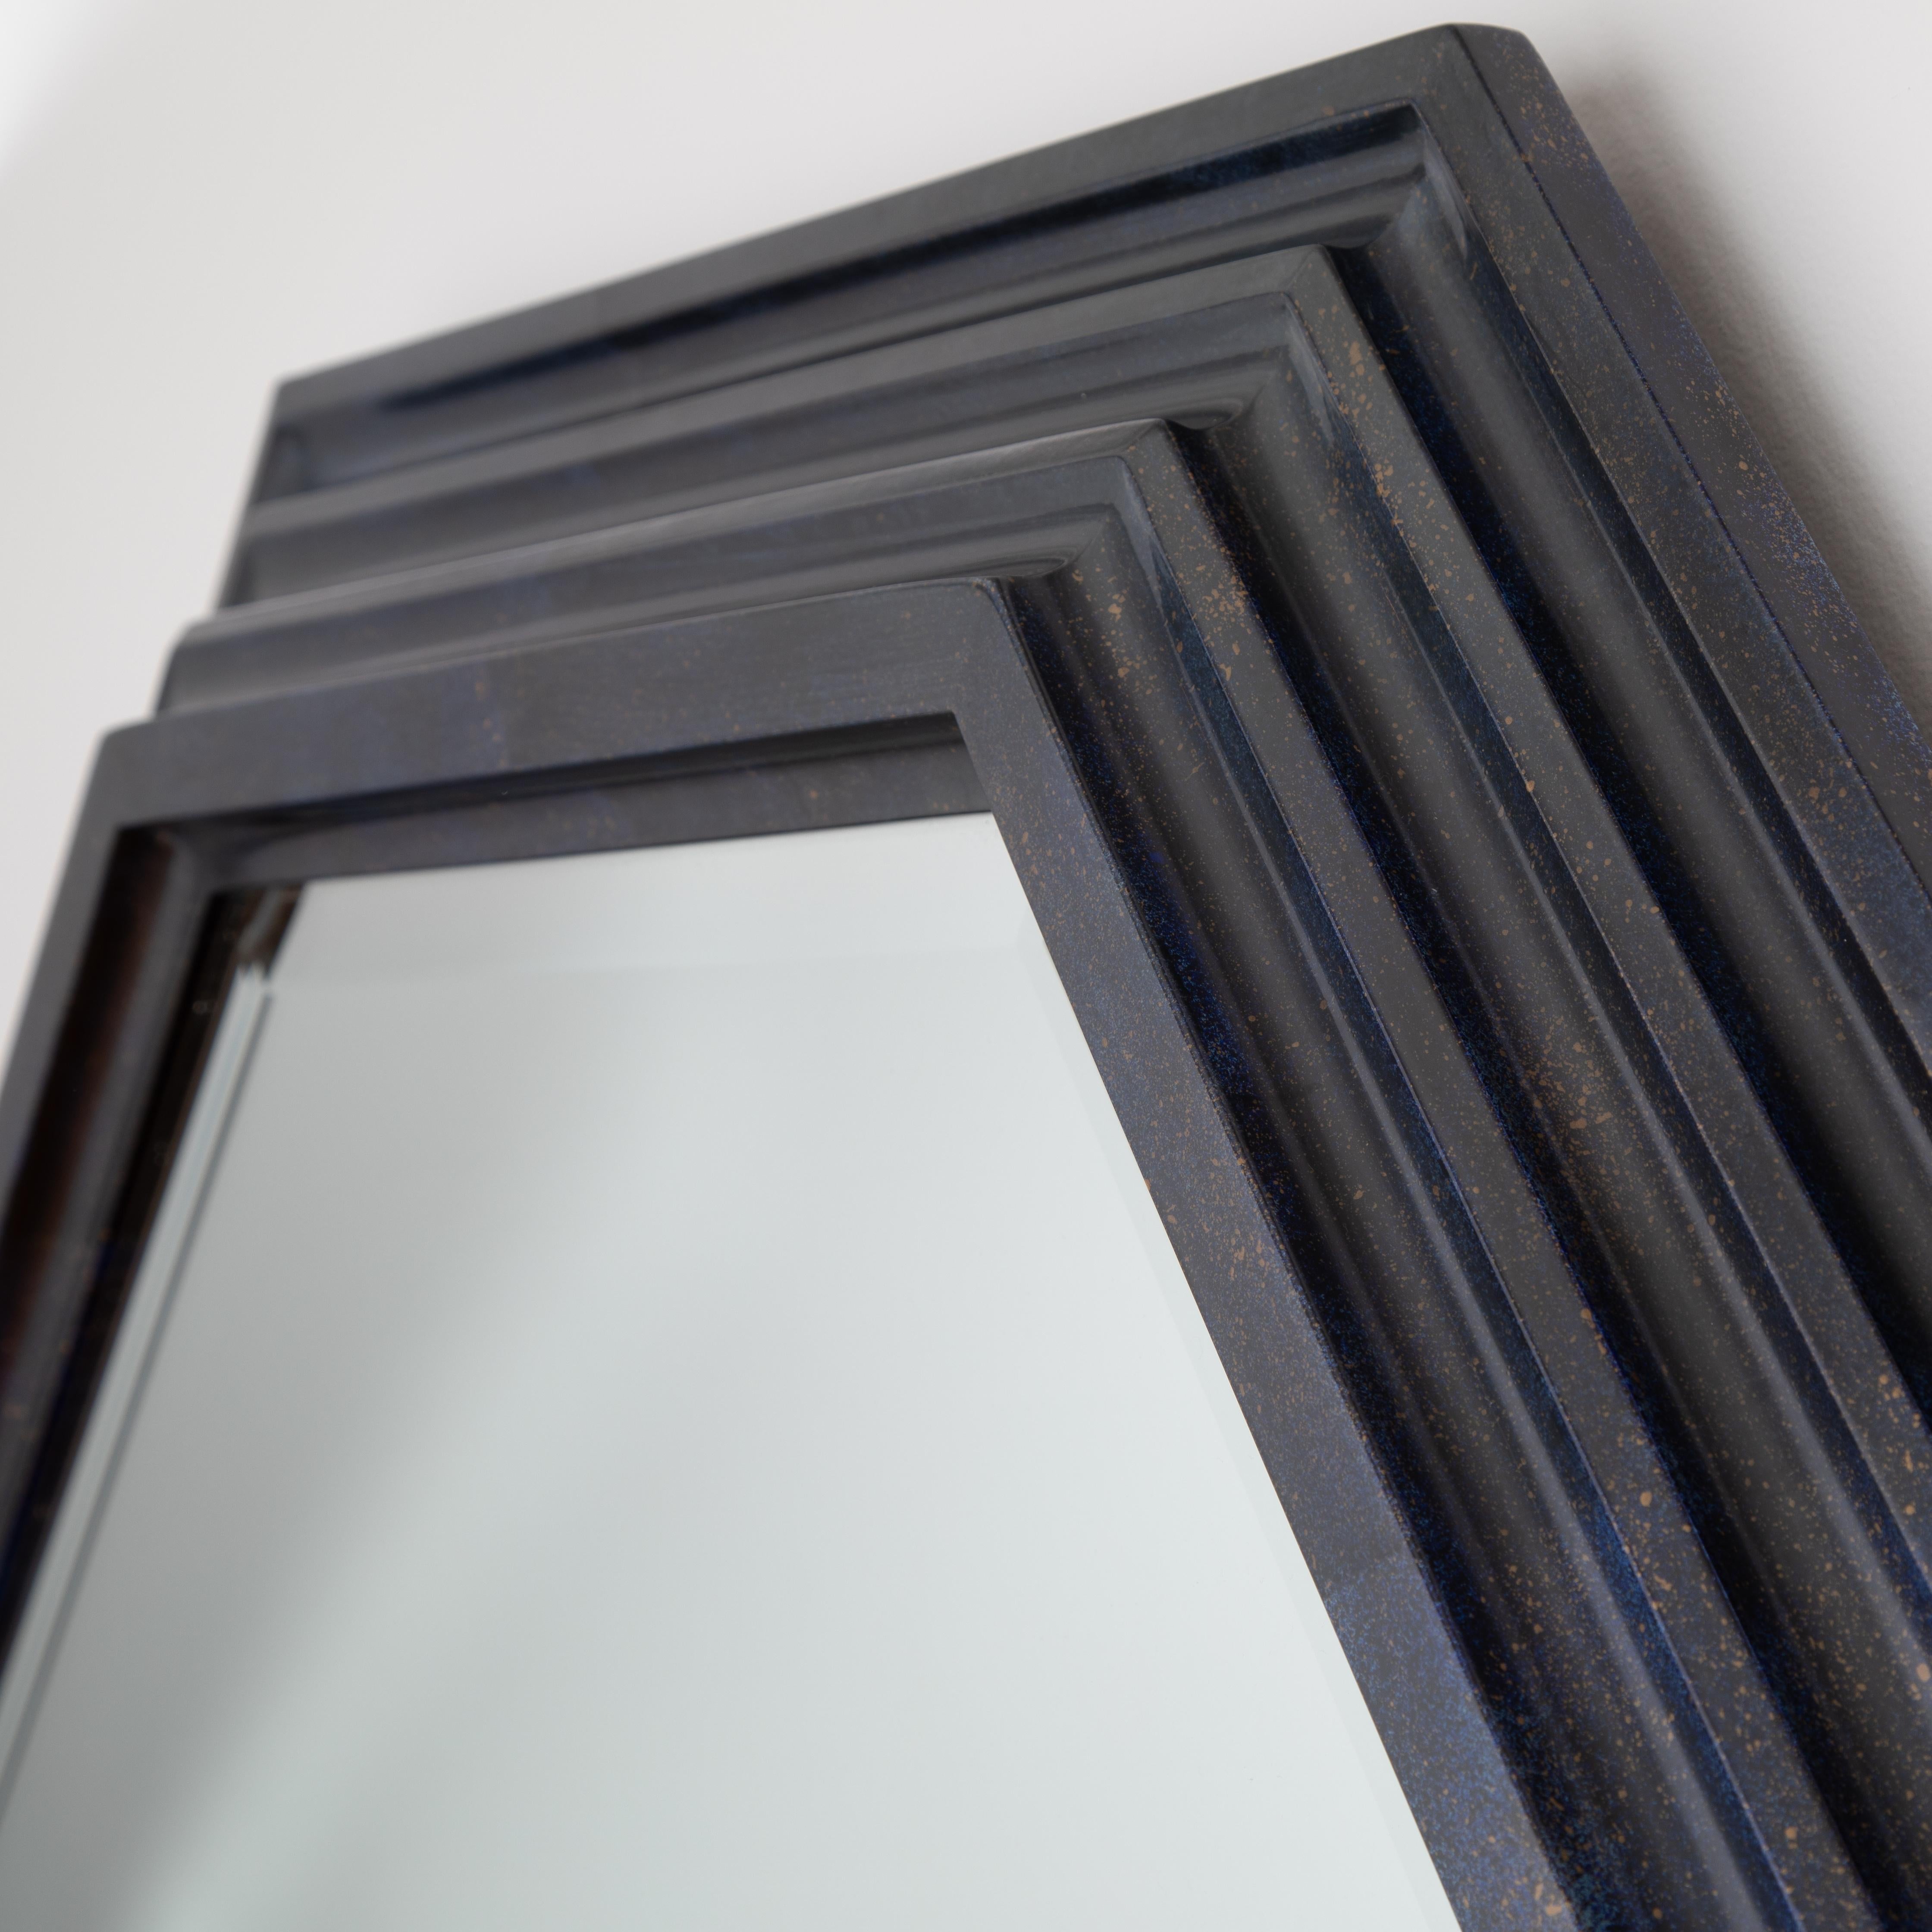 Gorgeous, grand-scale Karl Springer octagonal mirror with a deep, tiered wooden frame in a faux lacquer finish that mimics the semi-precious stone lapis lazuli. This deep-blue finish includes subtle faux seams where separate pieces of the 